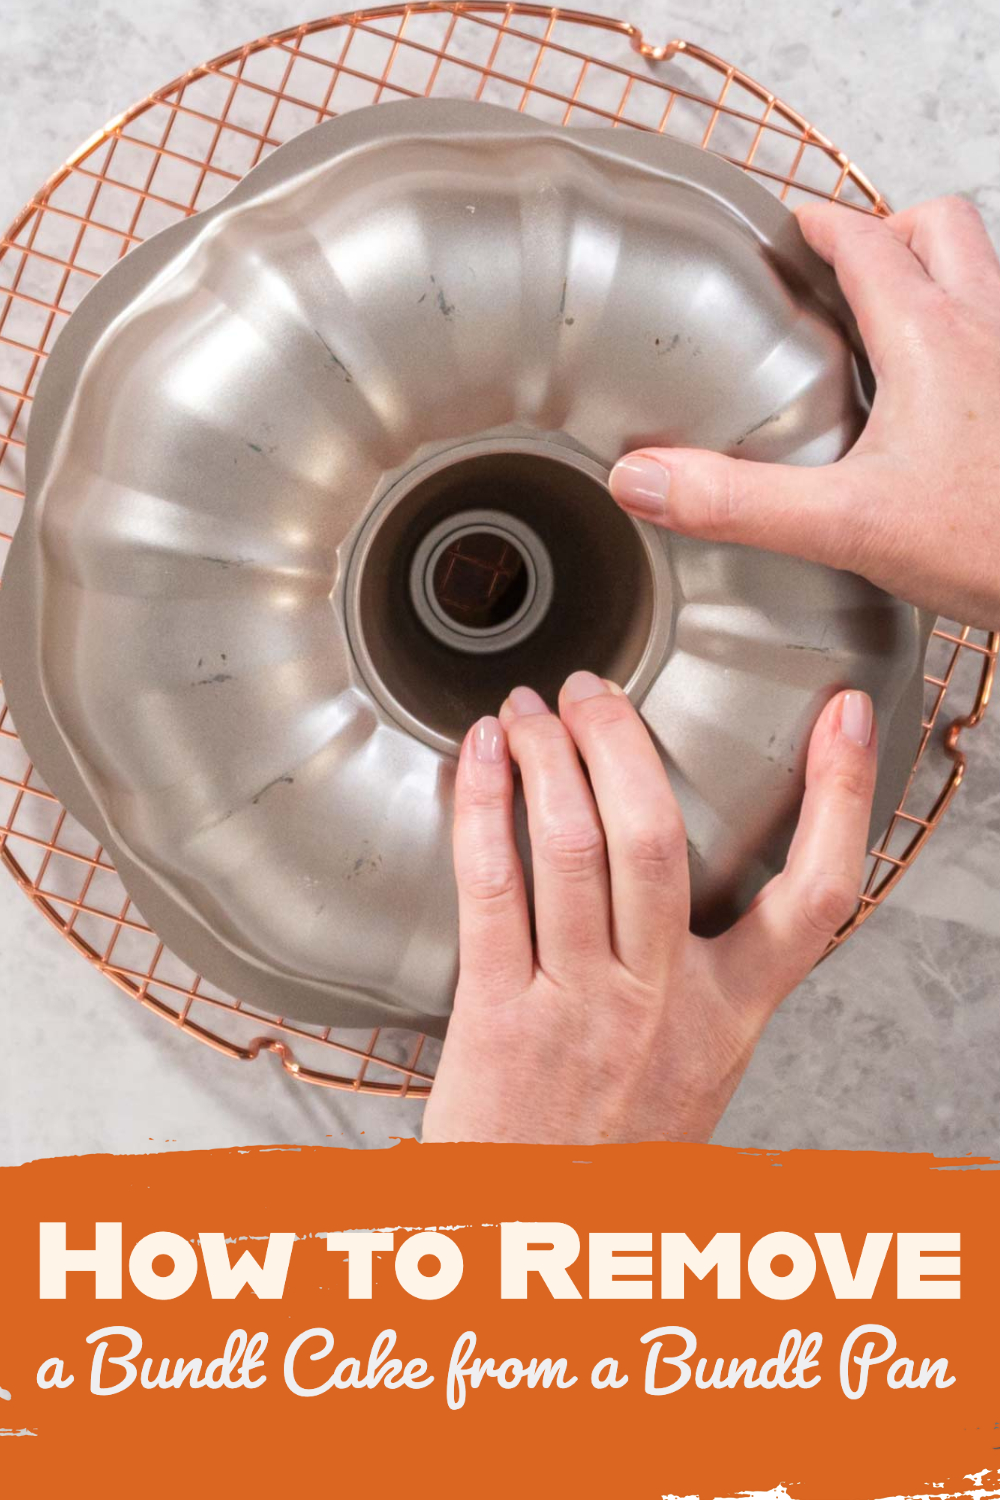 How to Remove a Bundt Cake from a Bundt Pan